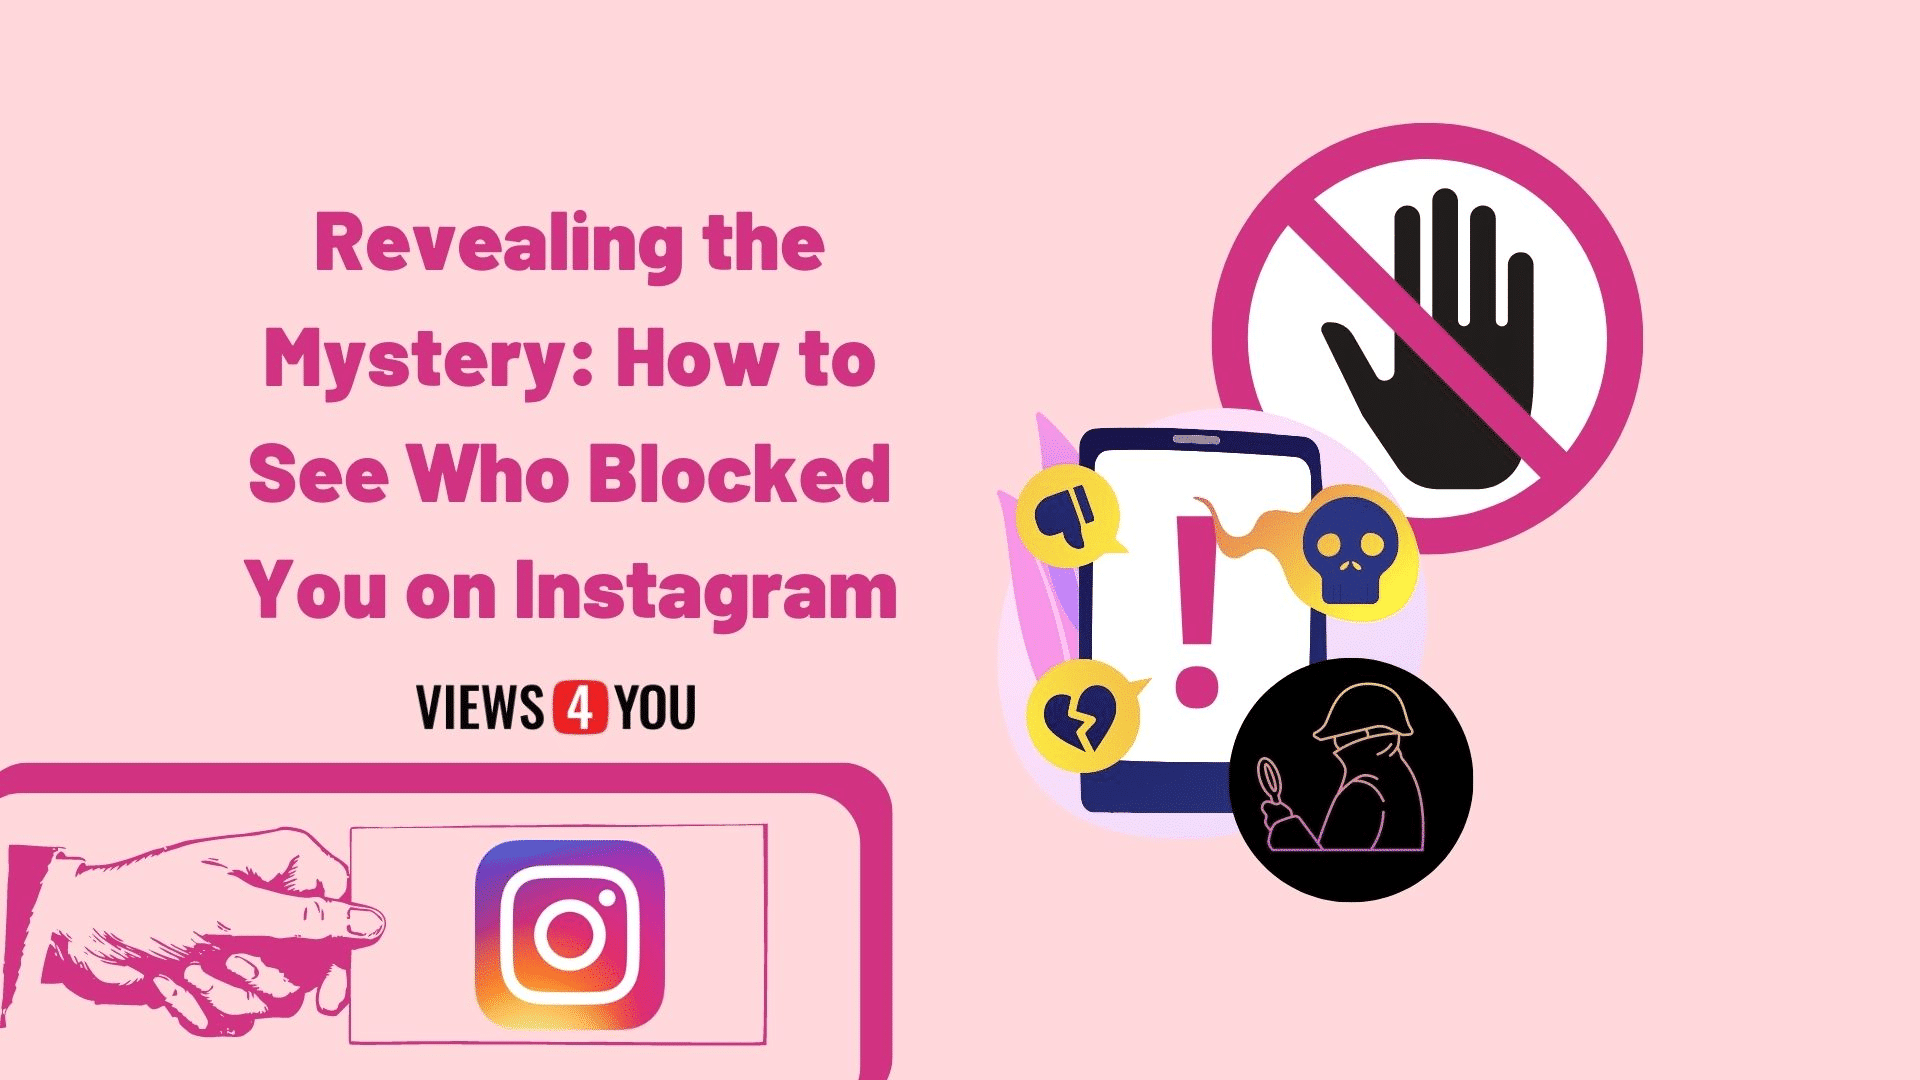 How to See Who Blocked You on Instagram.